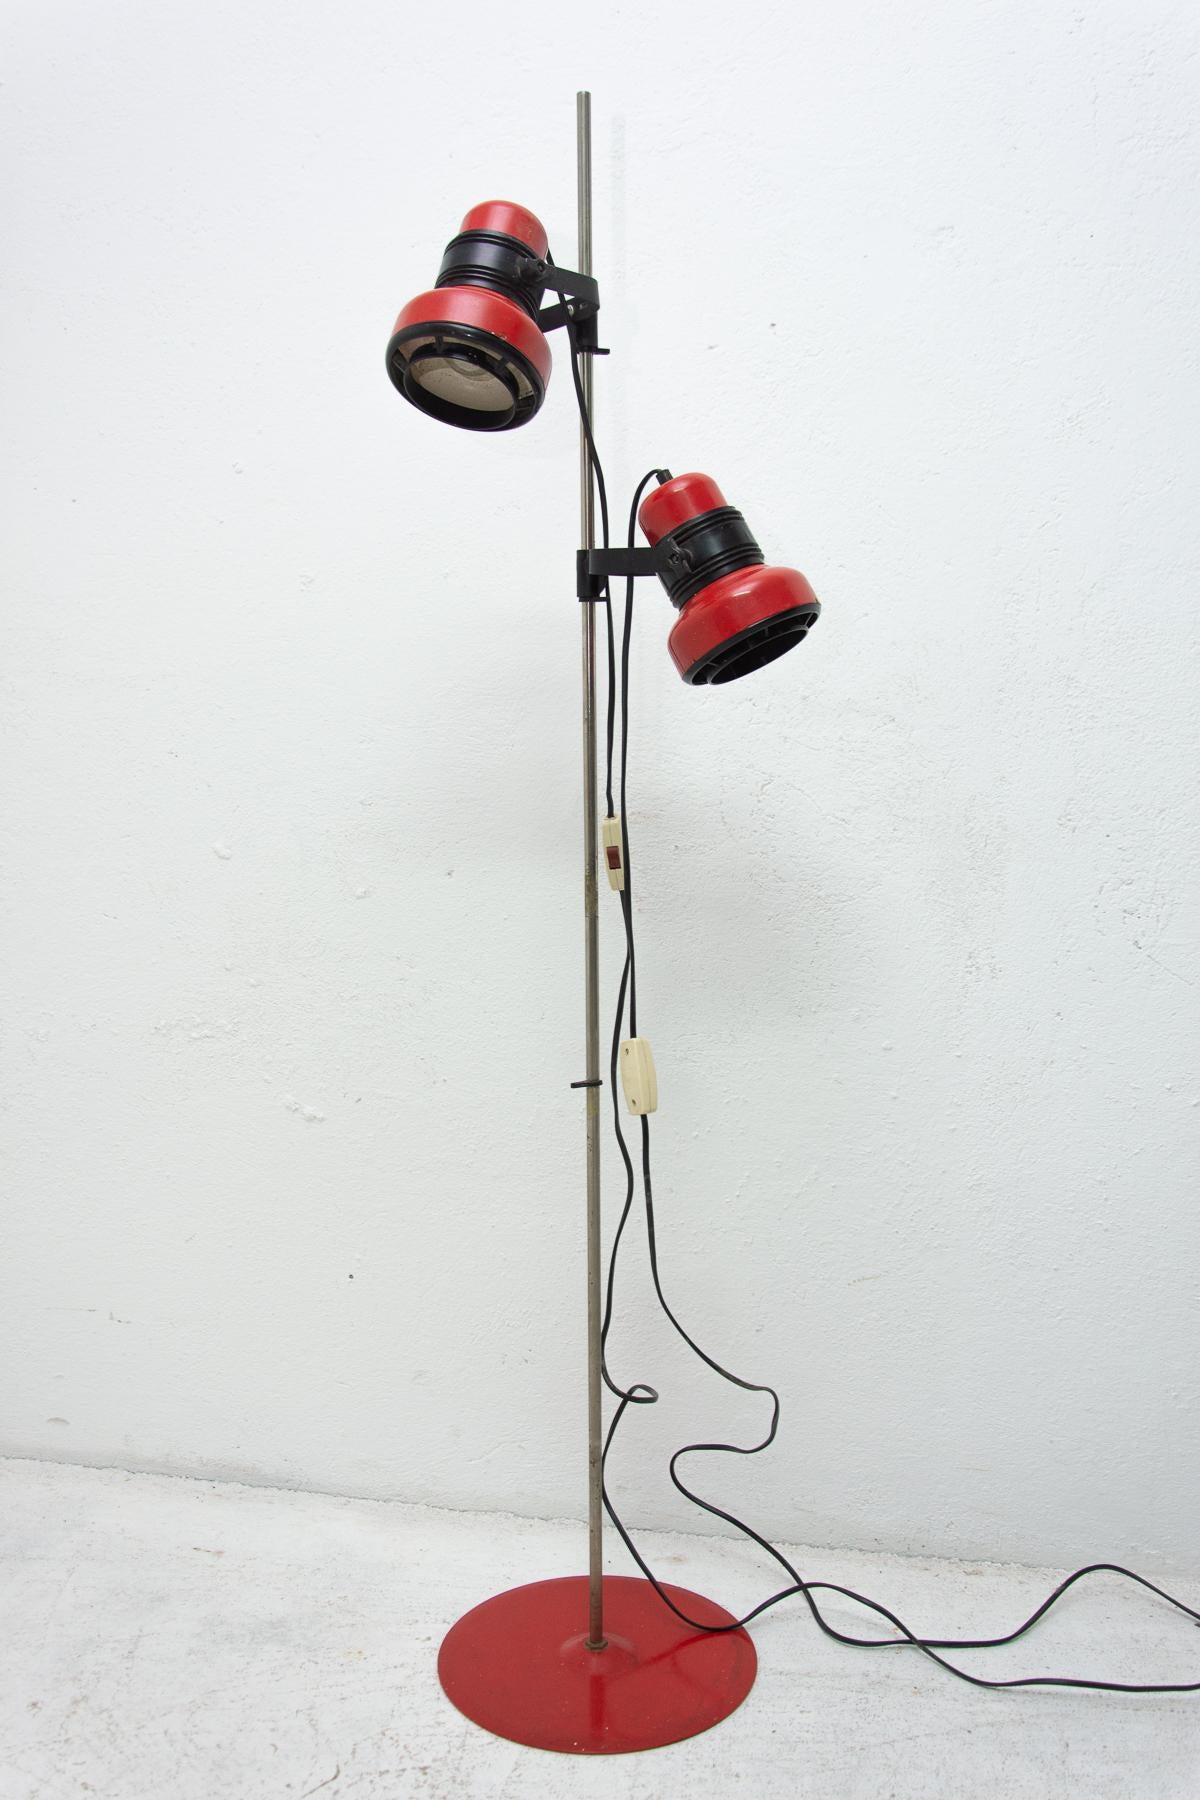 Hungarian Vintage Floor Lamp or Spolitlight, 1960s-1970s, Hungary